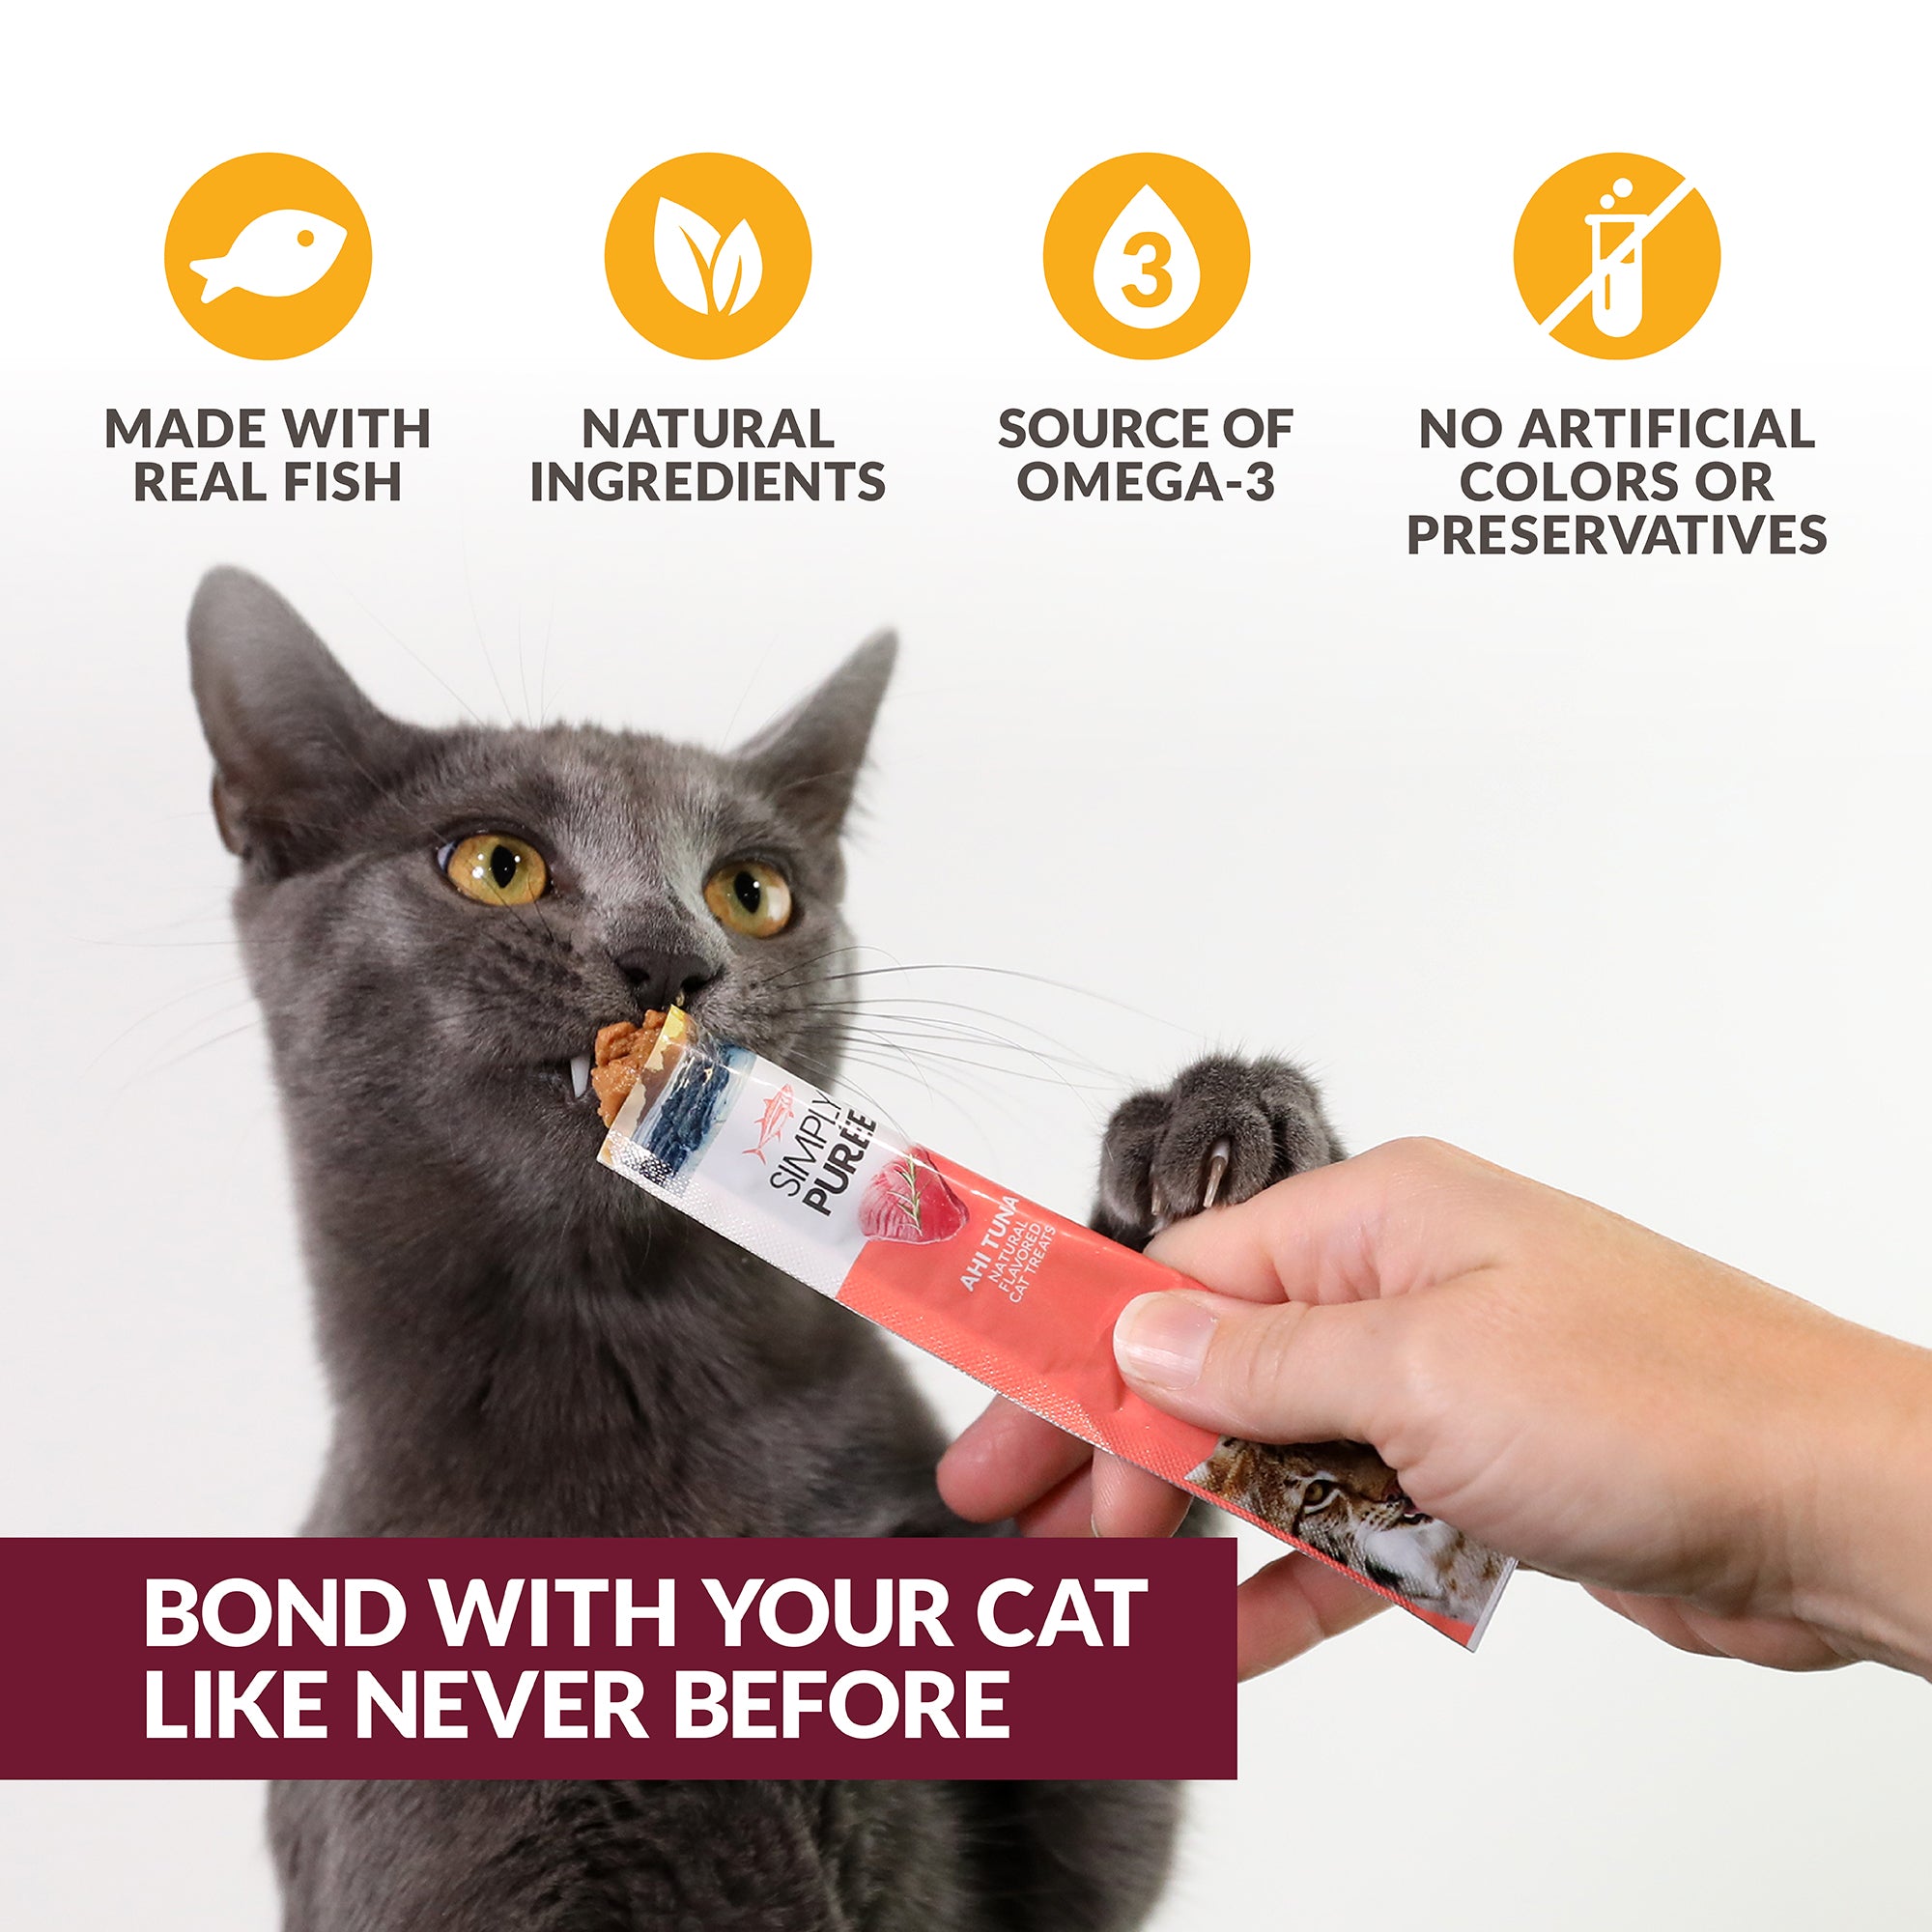 Bond With Your Cat Like Never Before Infographic